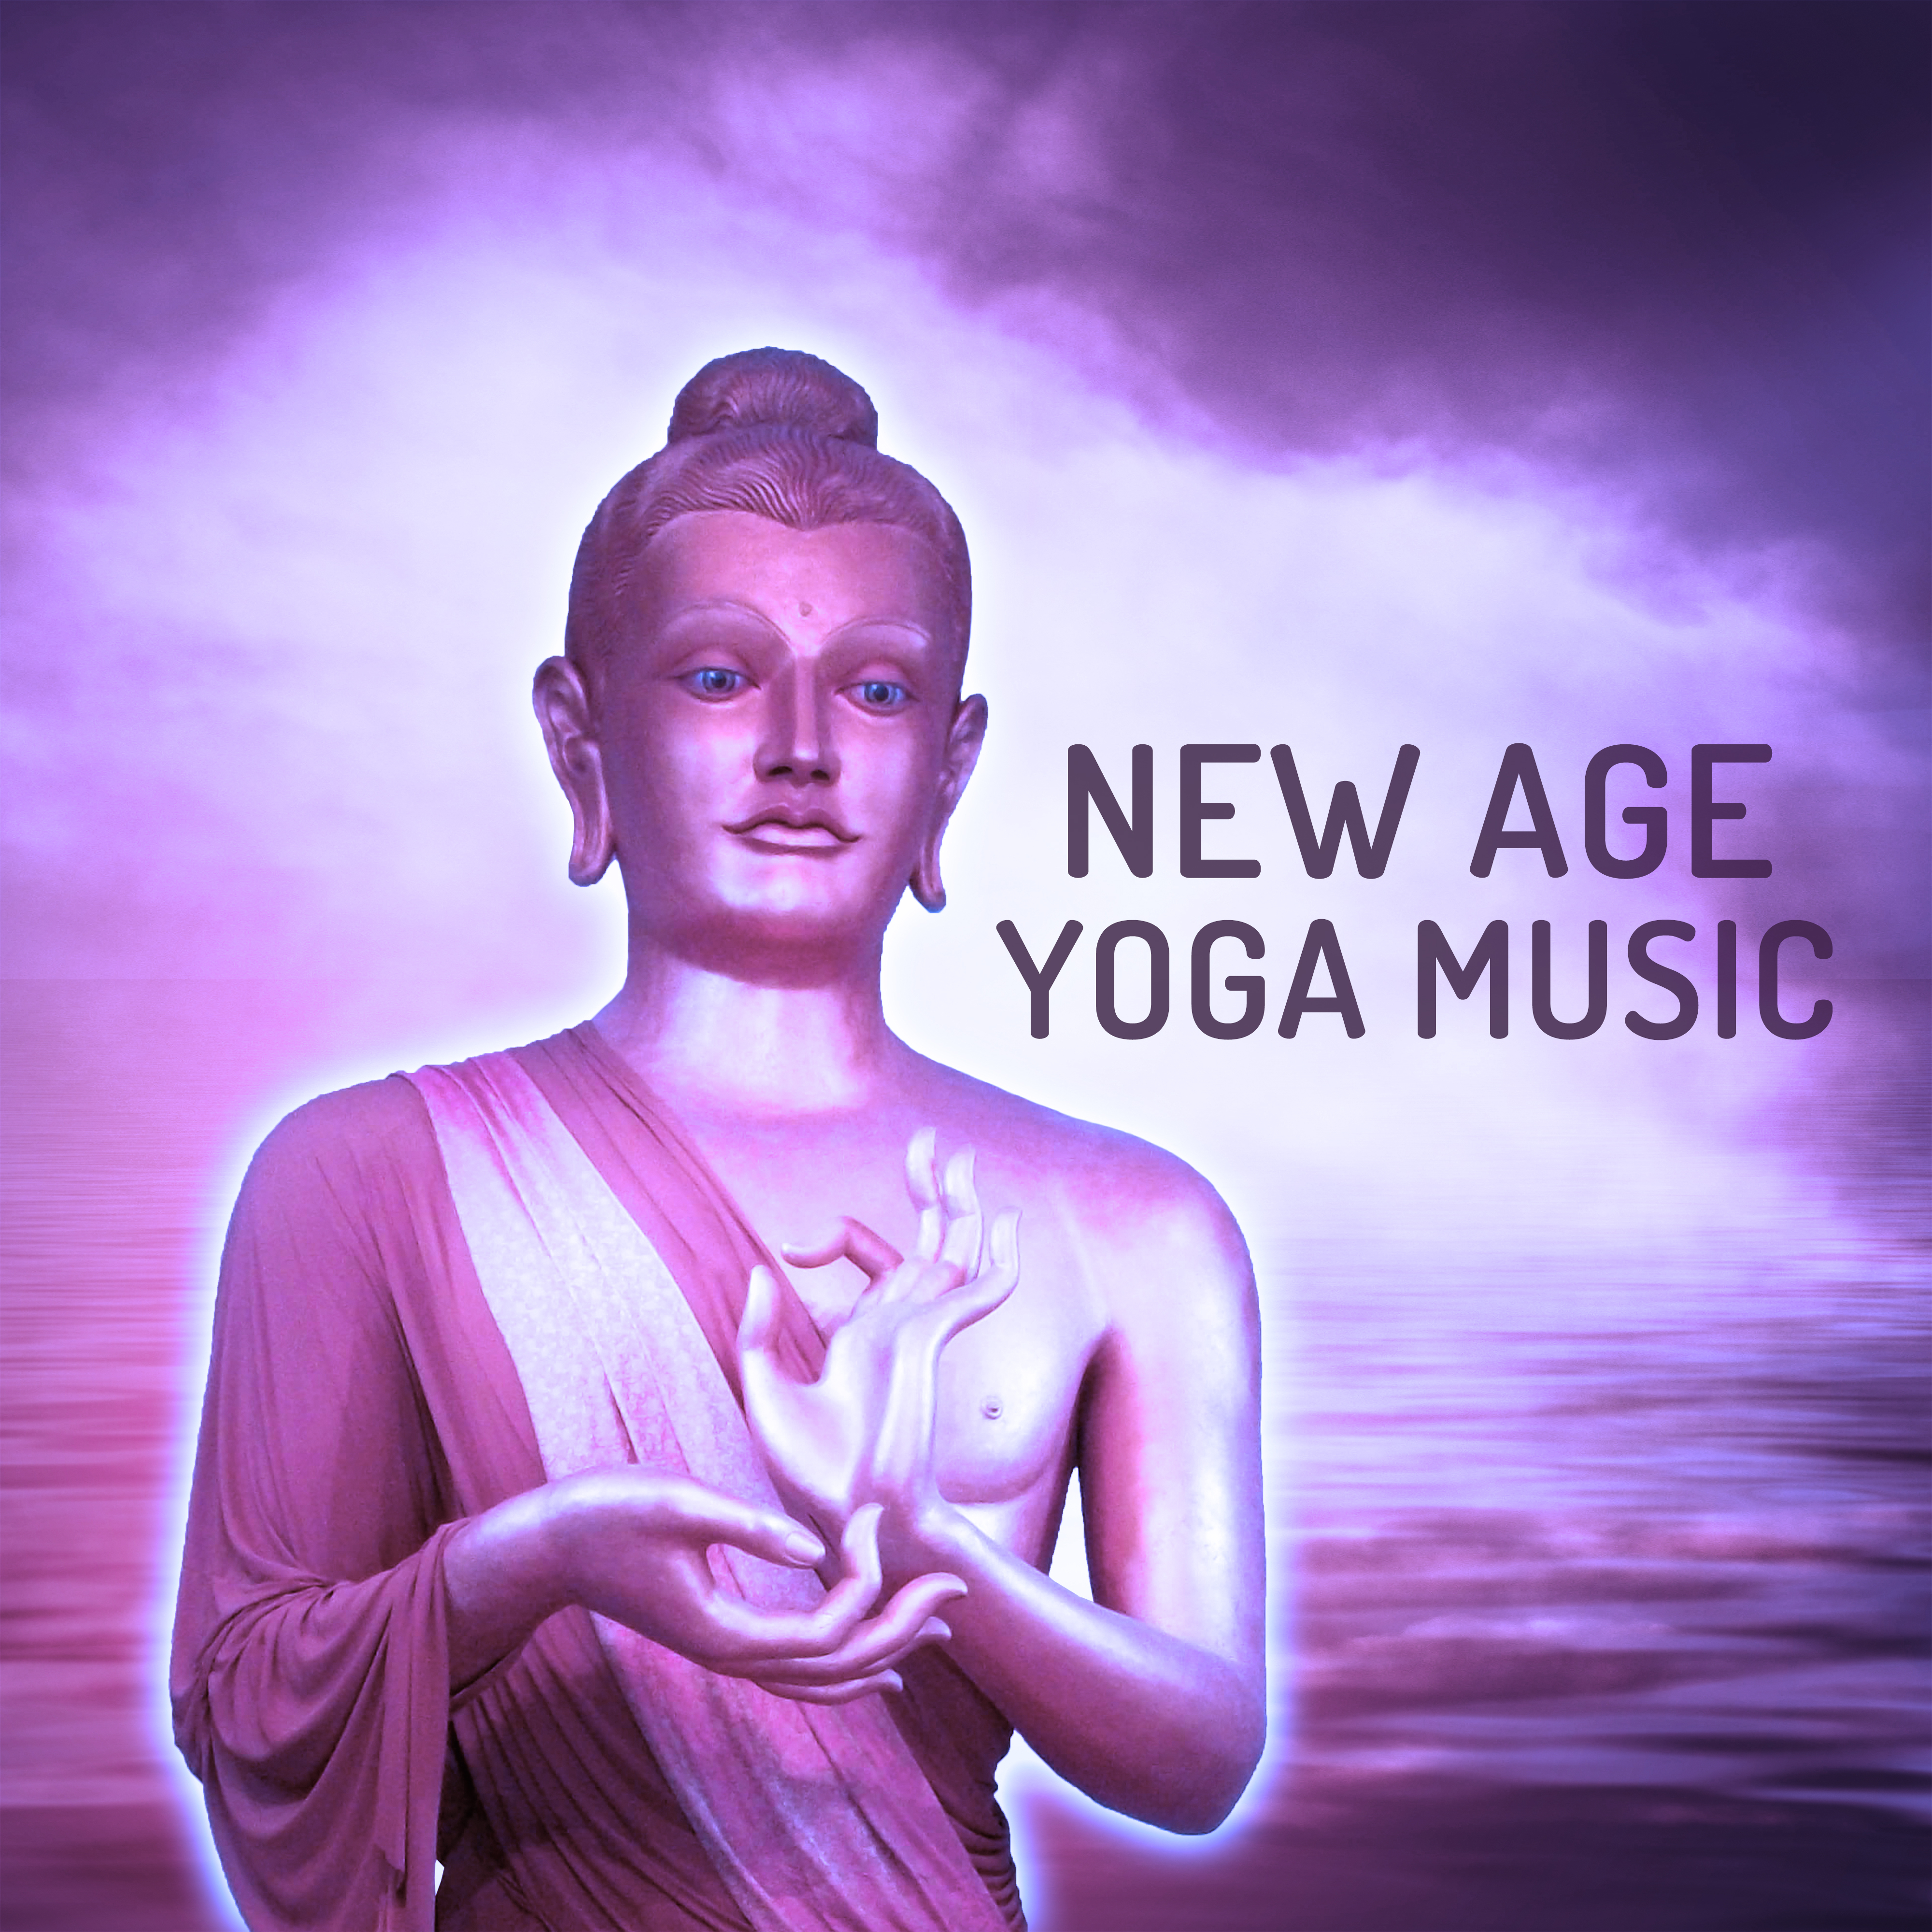 New Age Yoga Music – Soft Sounds for Relaxation, Soothing Waves, Meditation Sounds, Yoga Training